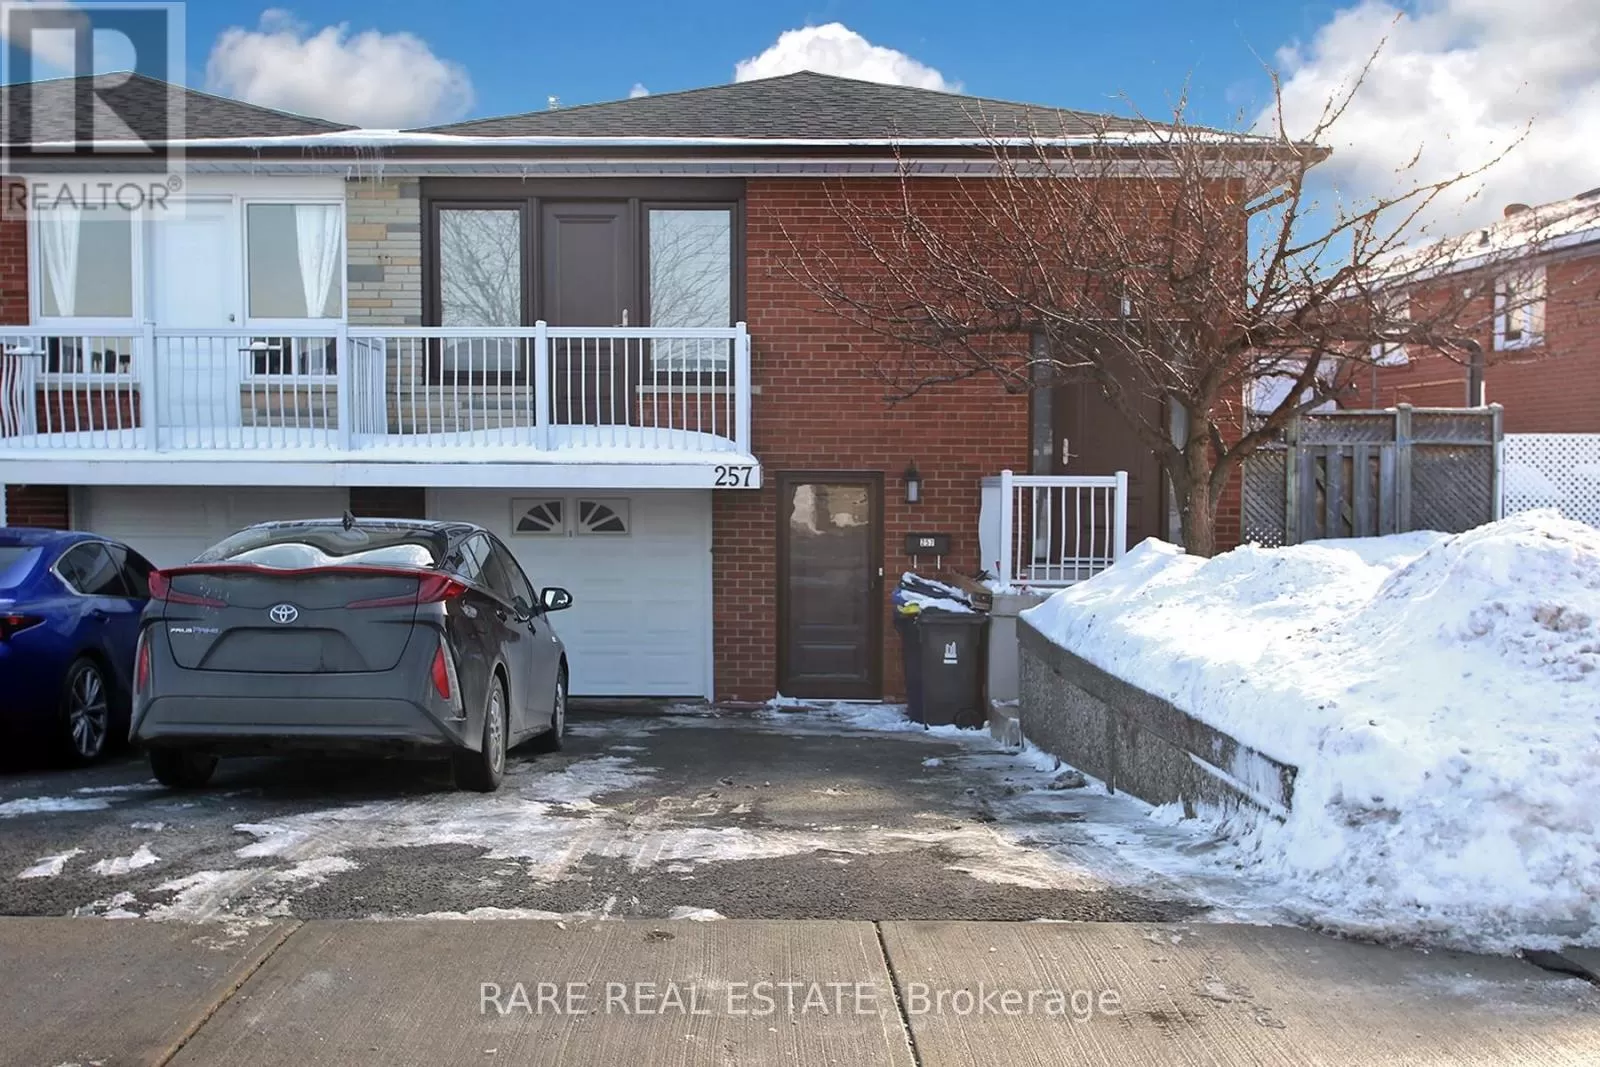 House for rent: Bsmt - 257 Hullmar Drive, Toronto, Ontario M3N 2G2